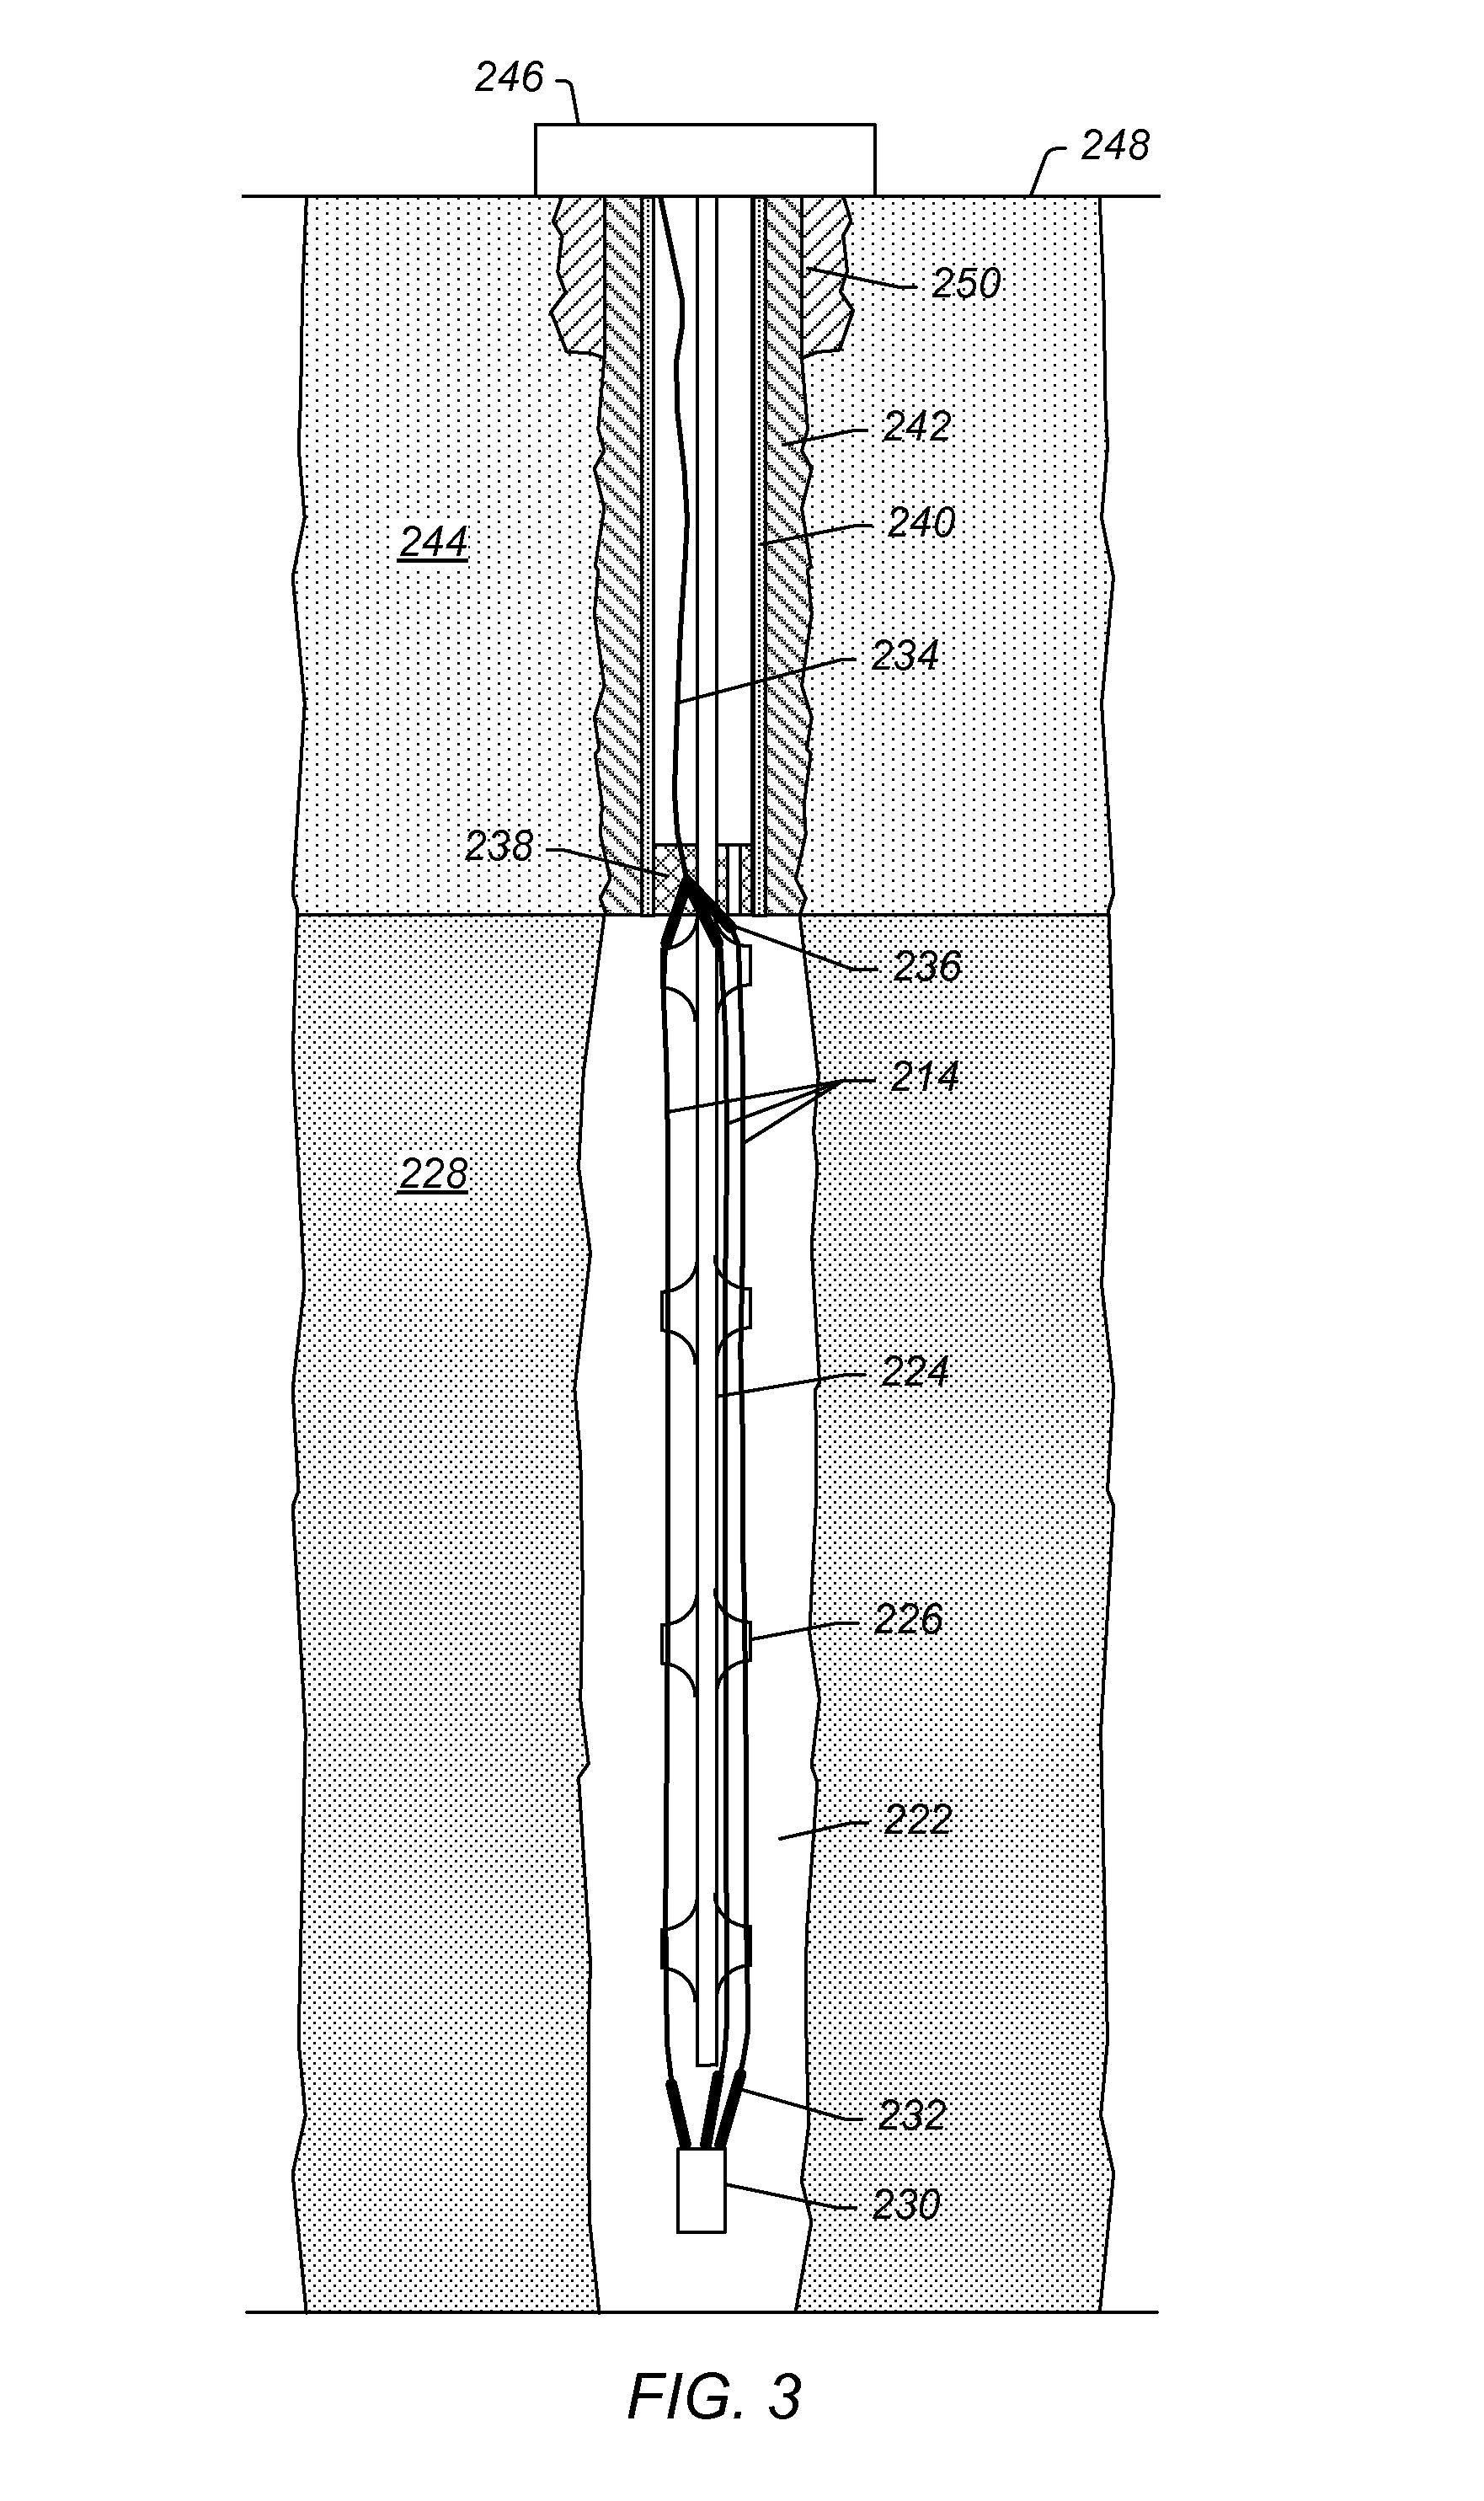 Treating hydrocarbon formations using hybrid in situ heat treatment and steam methods